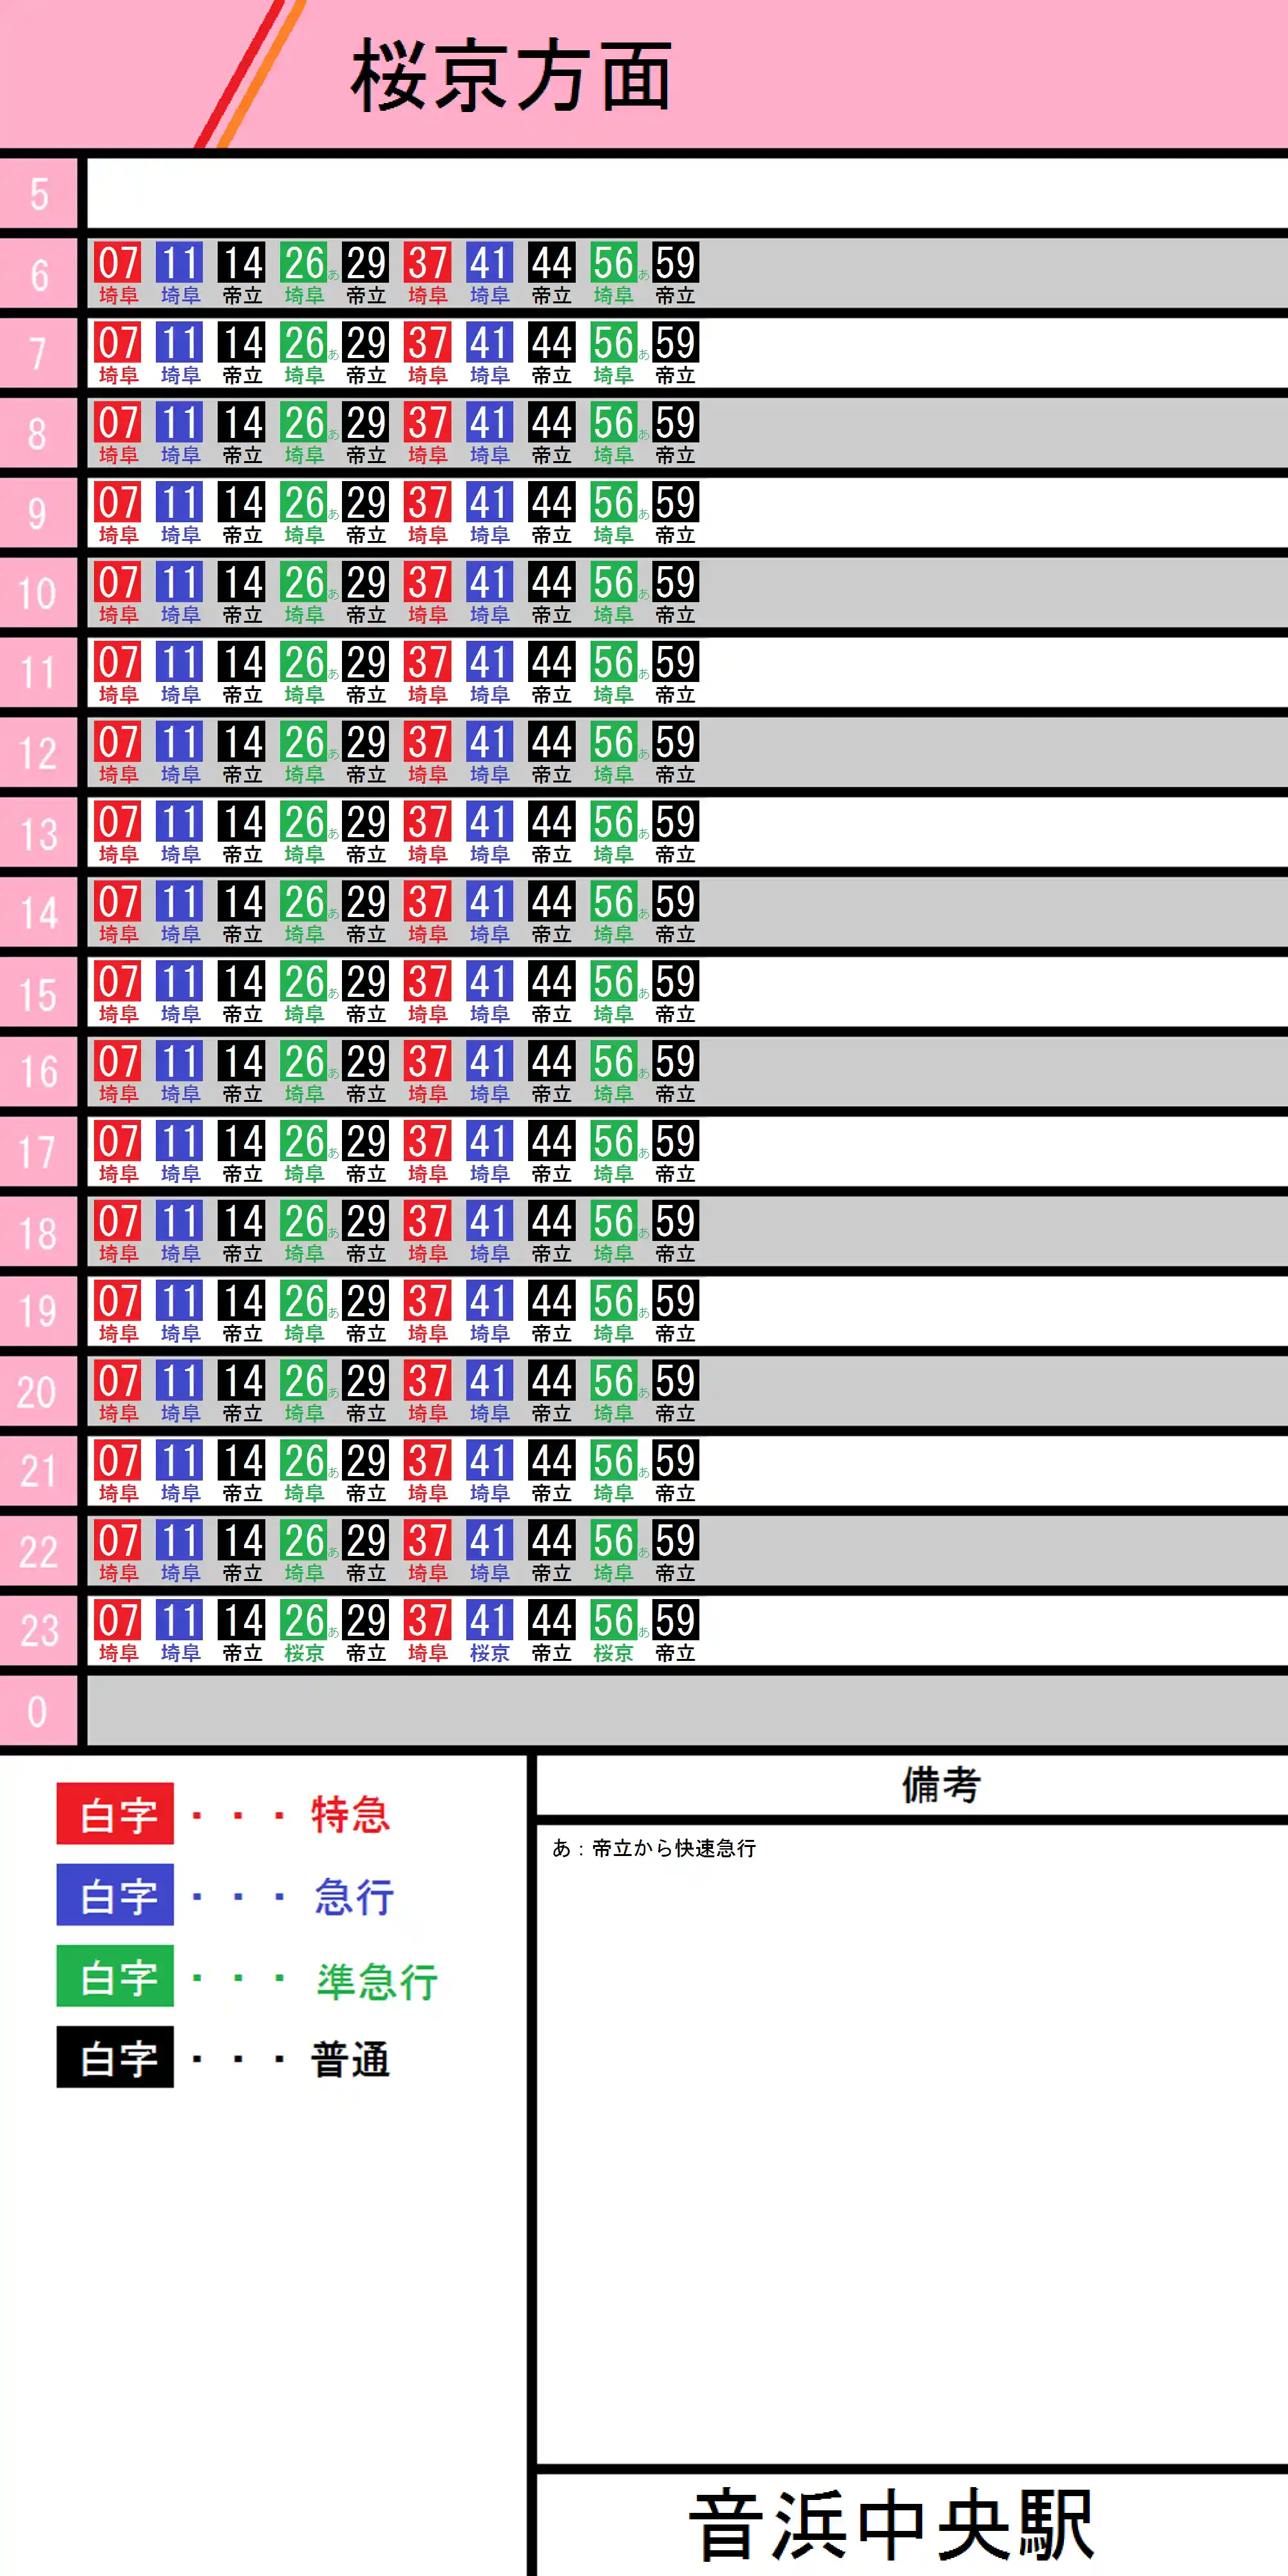 timetable-otohamachuo.png